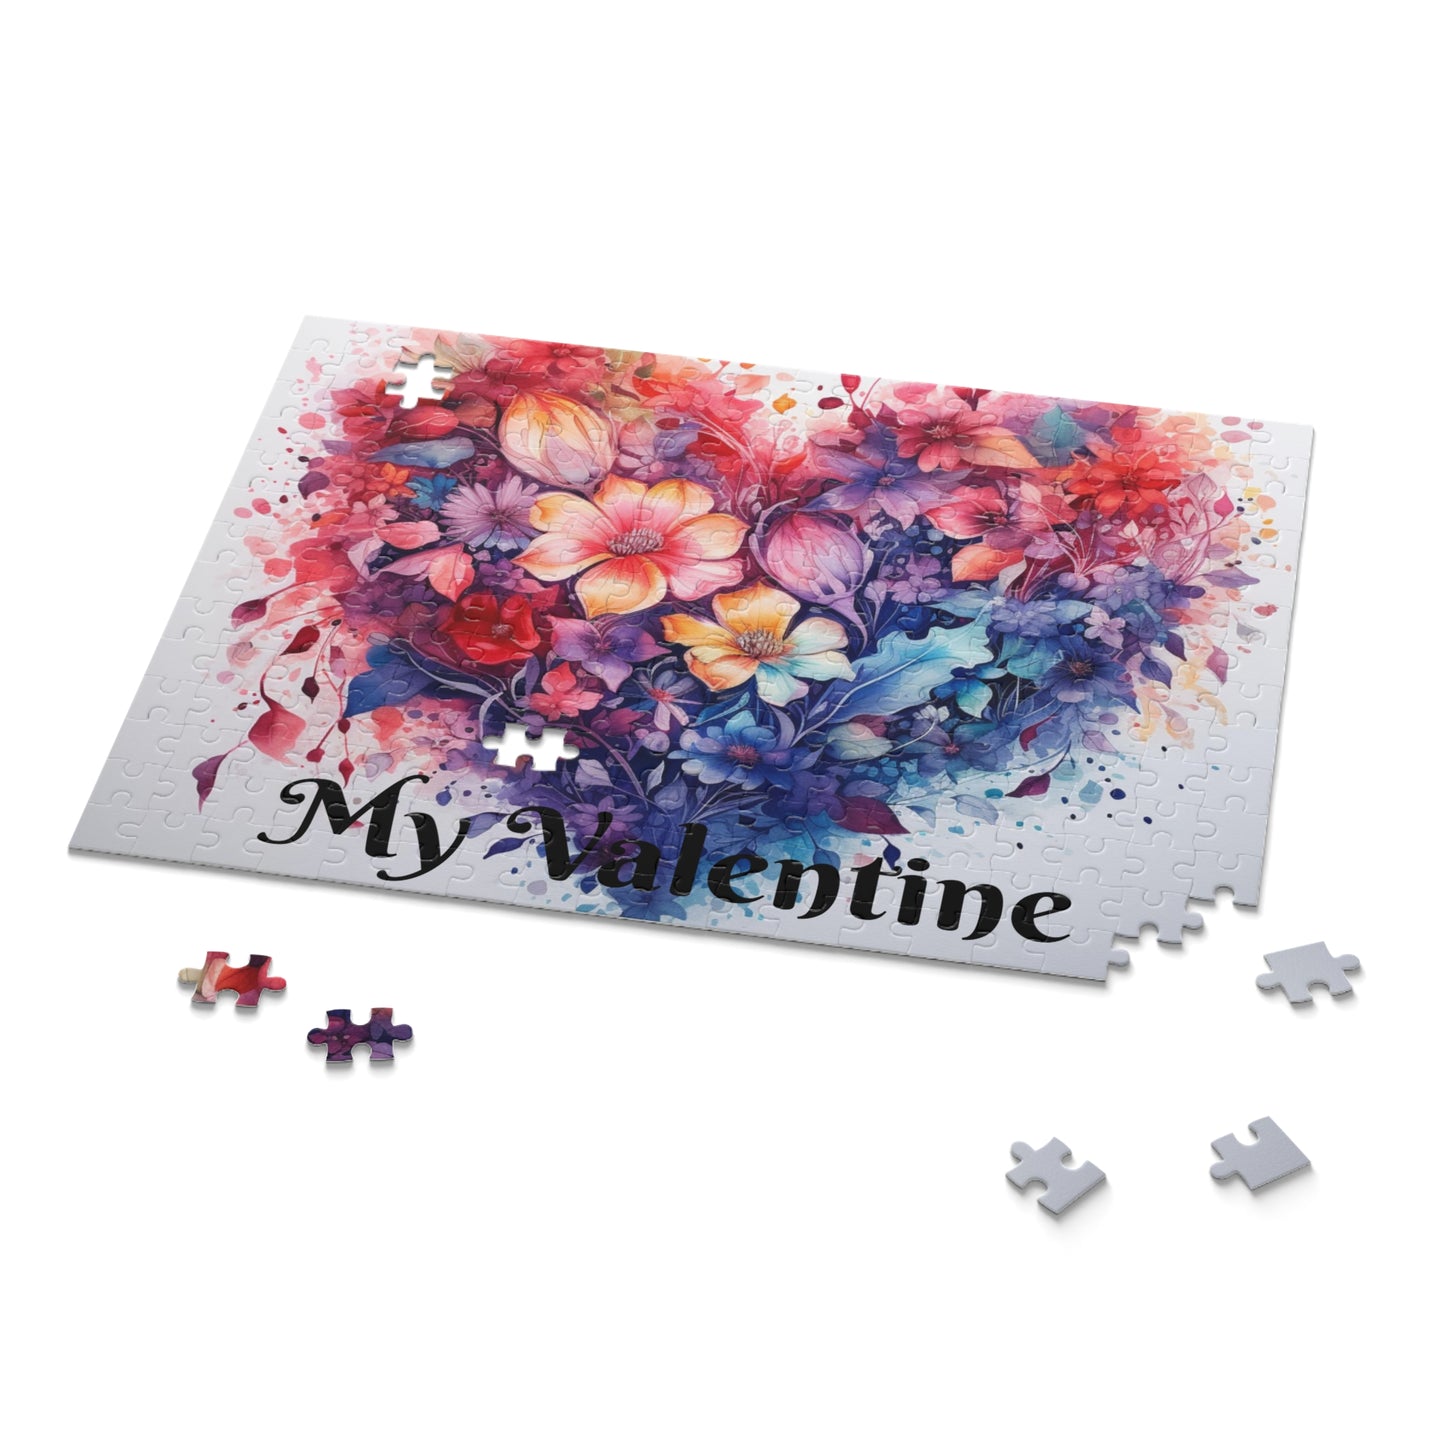 My Valentine Puzzle (120, 252, 500-Piece) Wife Girlfriend Sweetheart Love Lover Spouse Soulmate Mate February 14 Fun Games Jig Saw Challenge